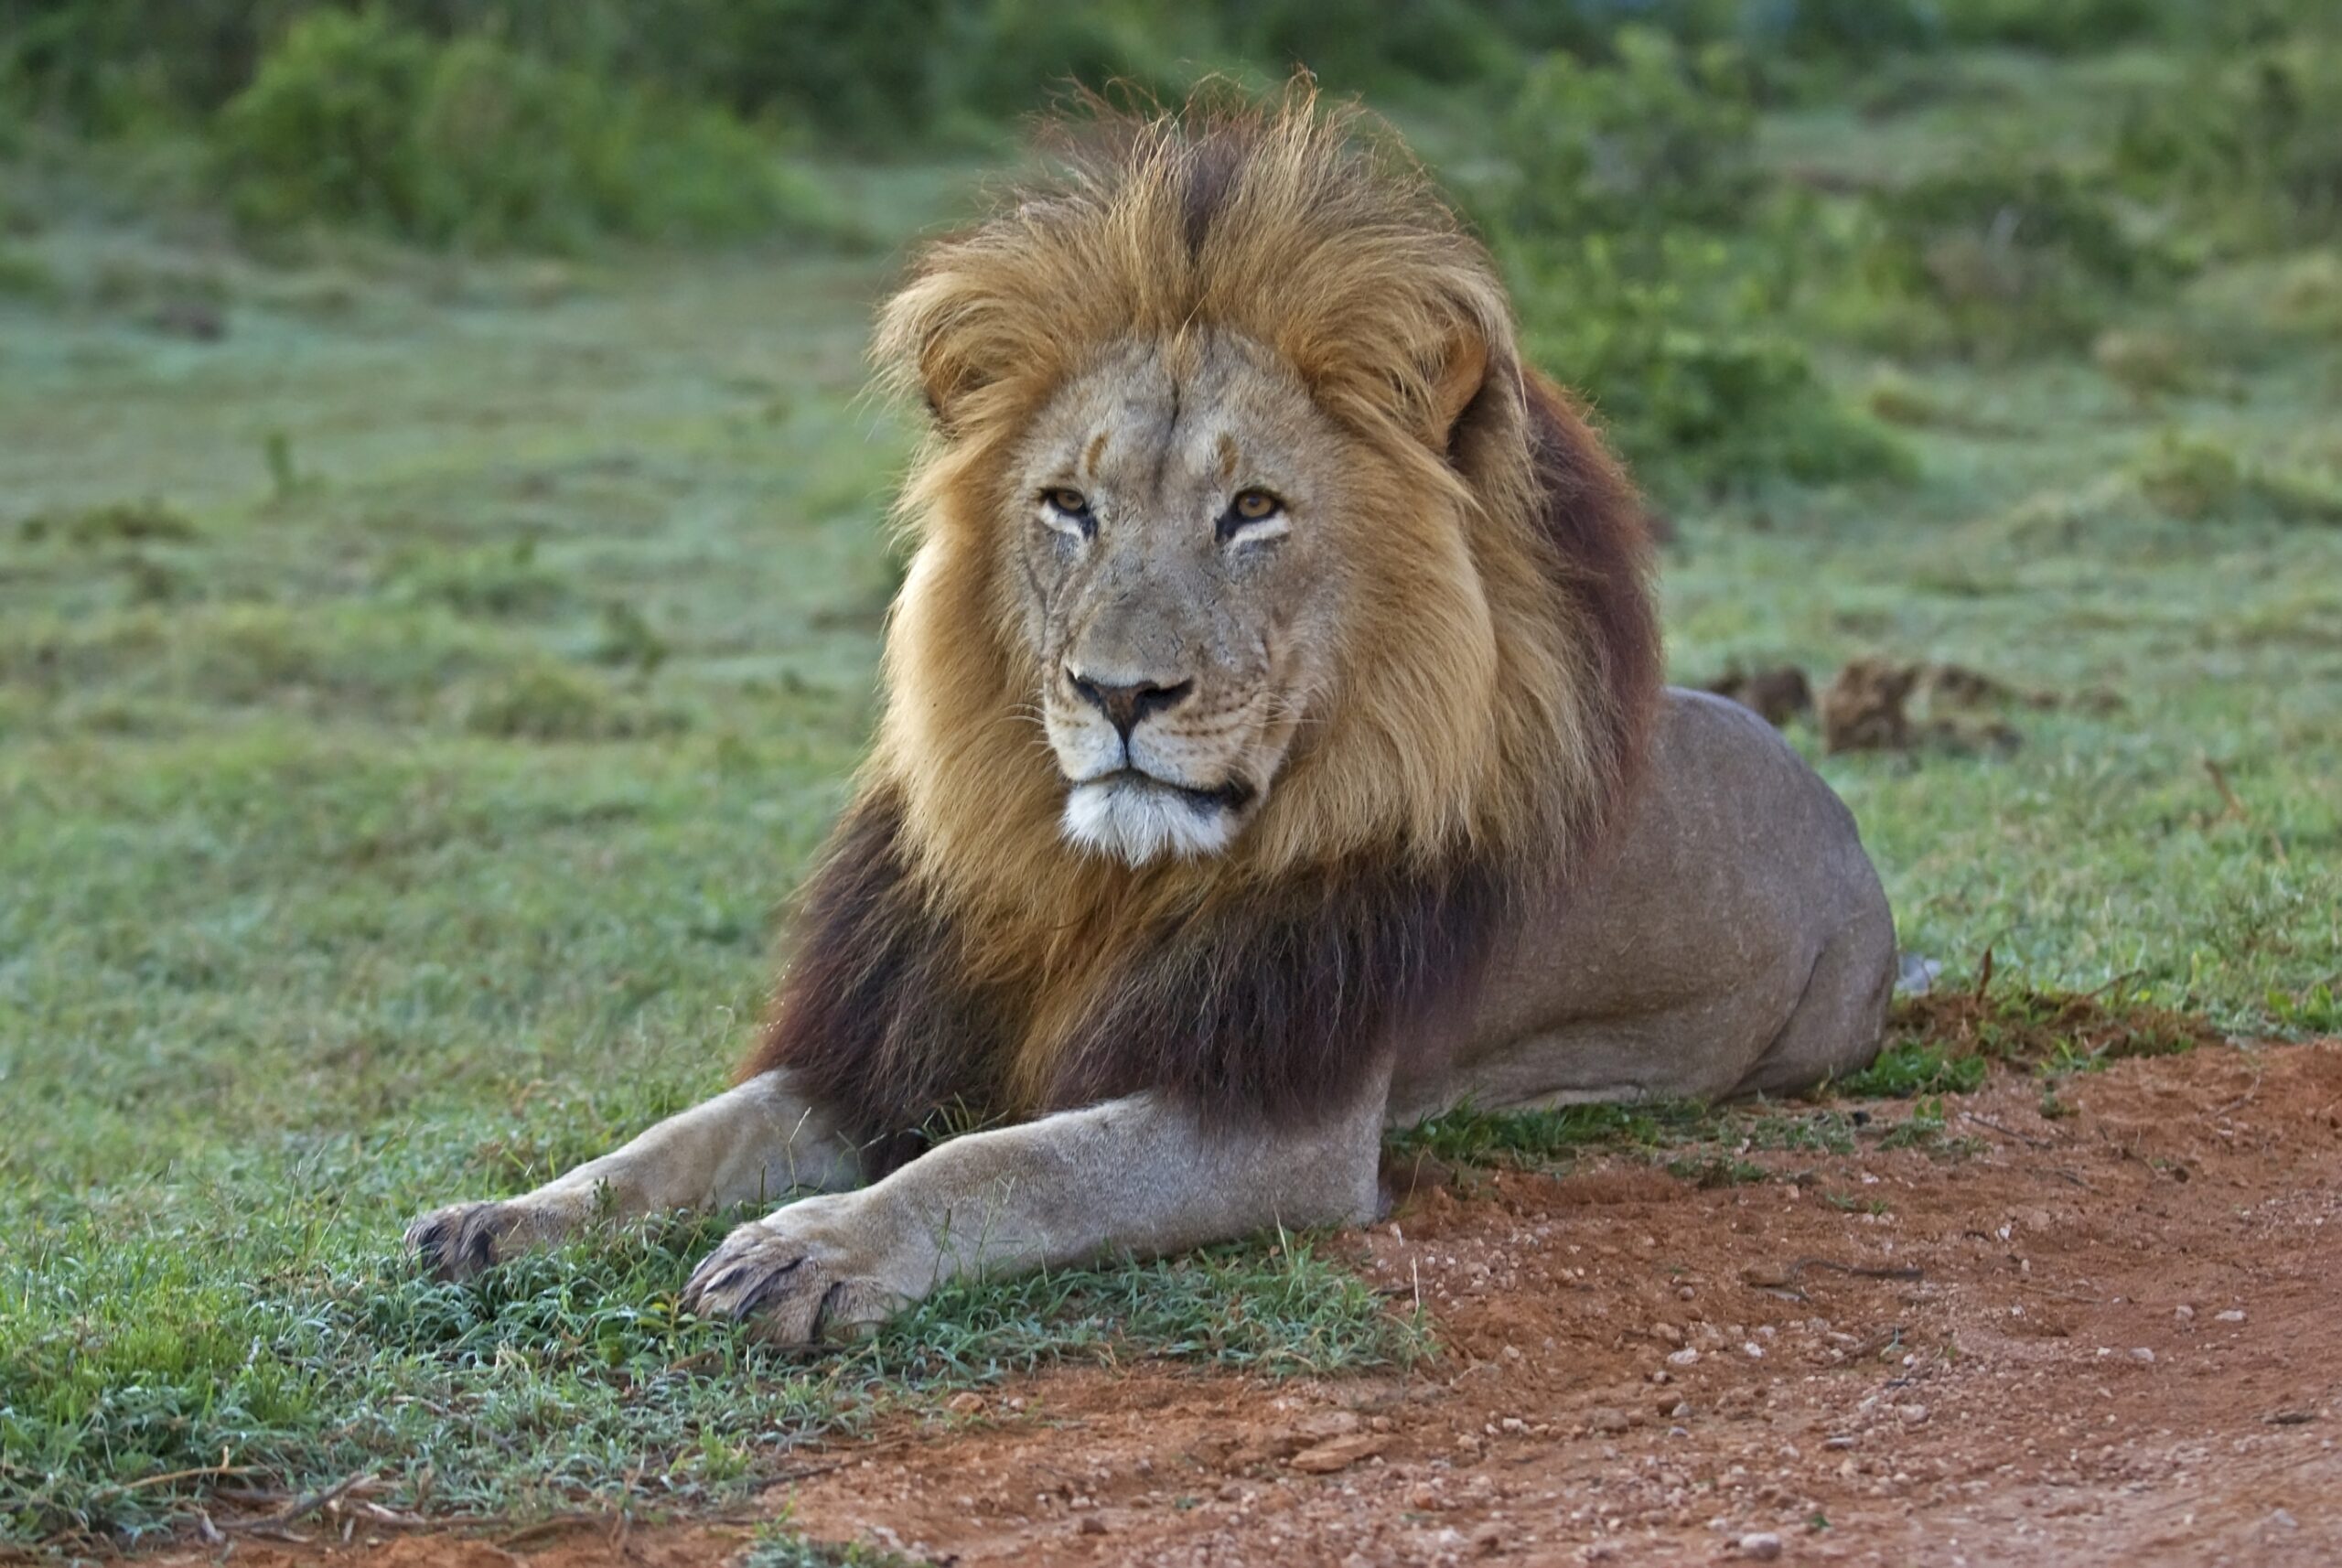 Addo lion | Addo Elephant National Park: The Ultimate South African Safari Park Guide